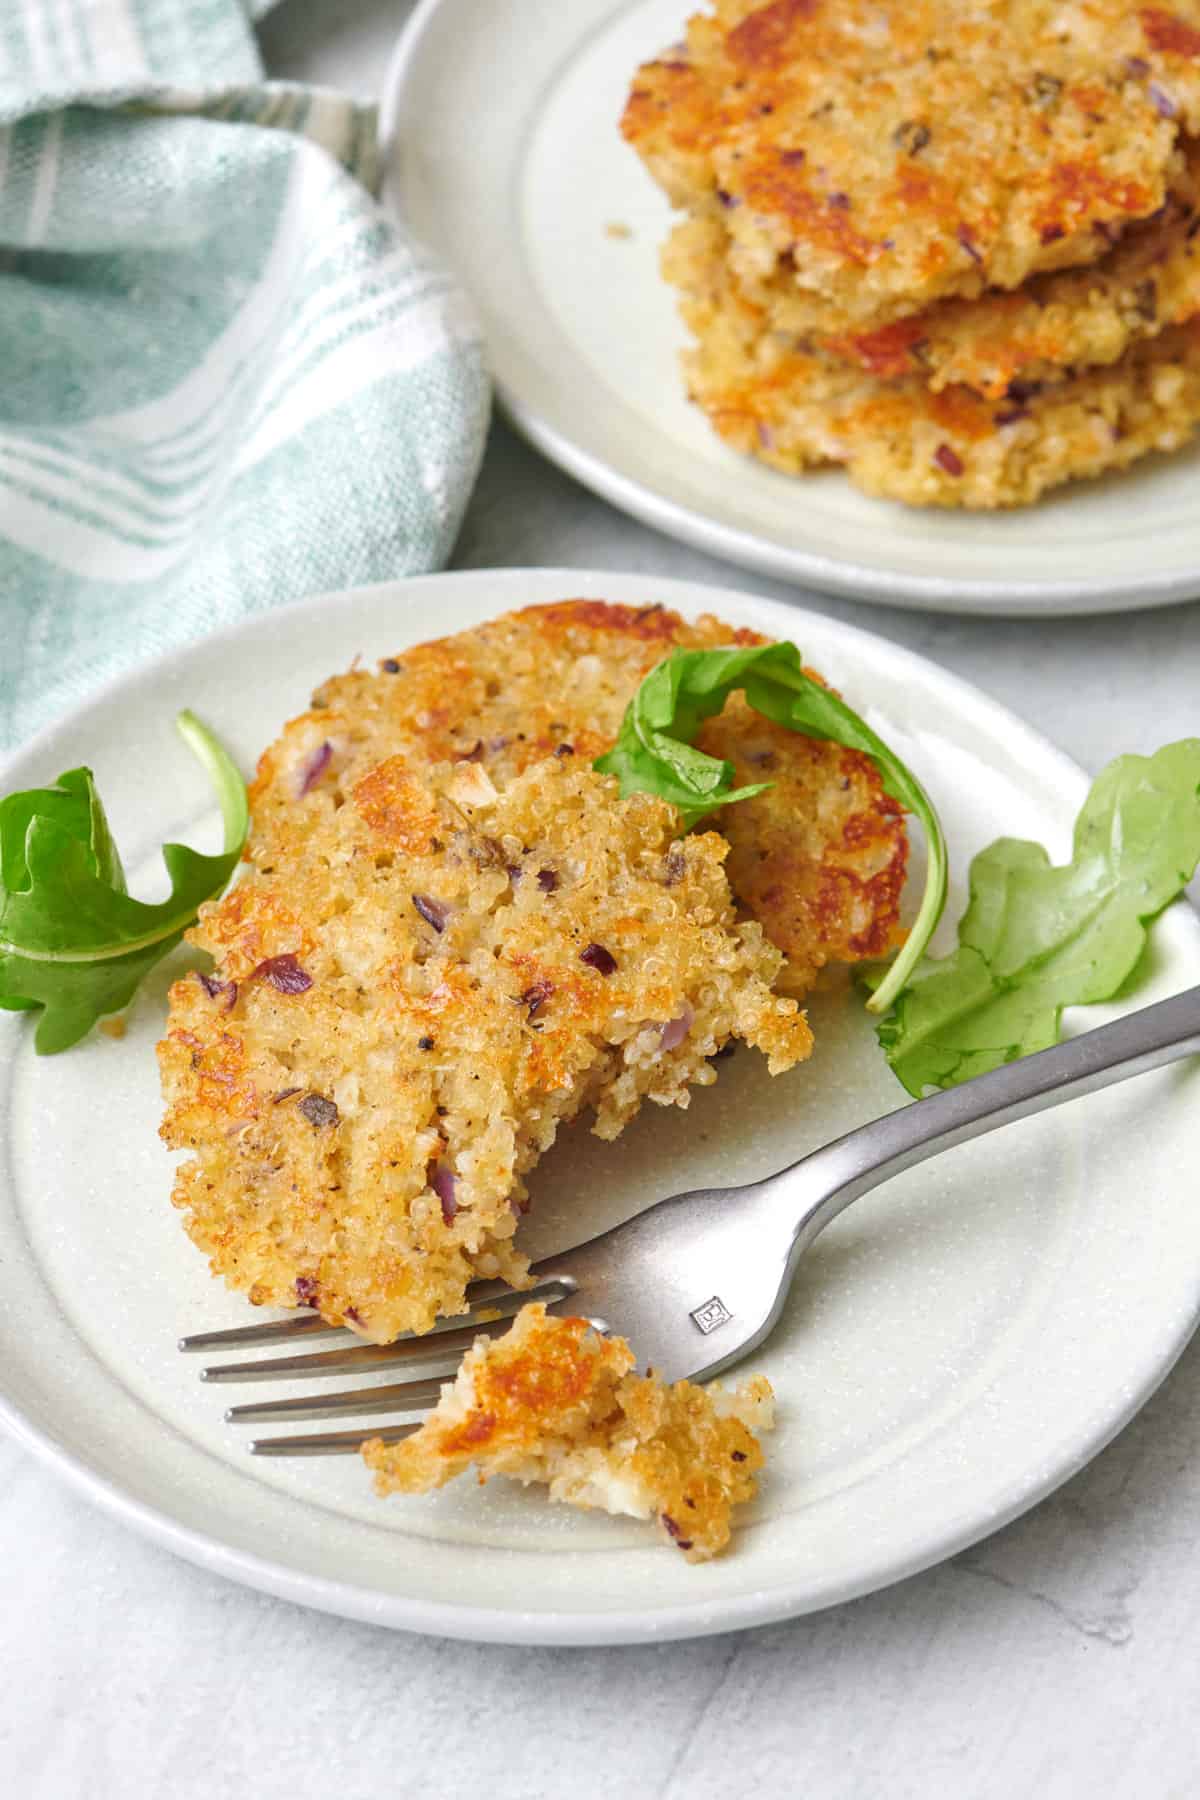 A few quinoa patties on a small plate with a fork and bite taken, small plate of more nearby.